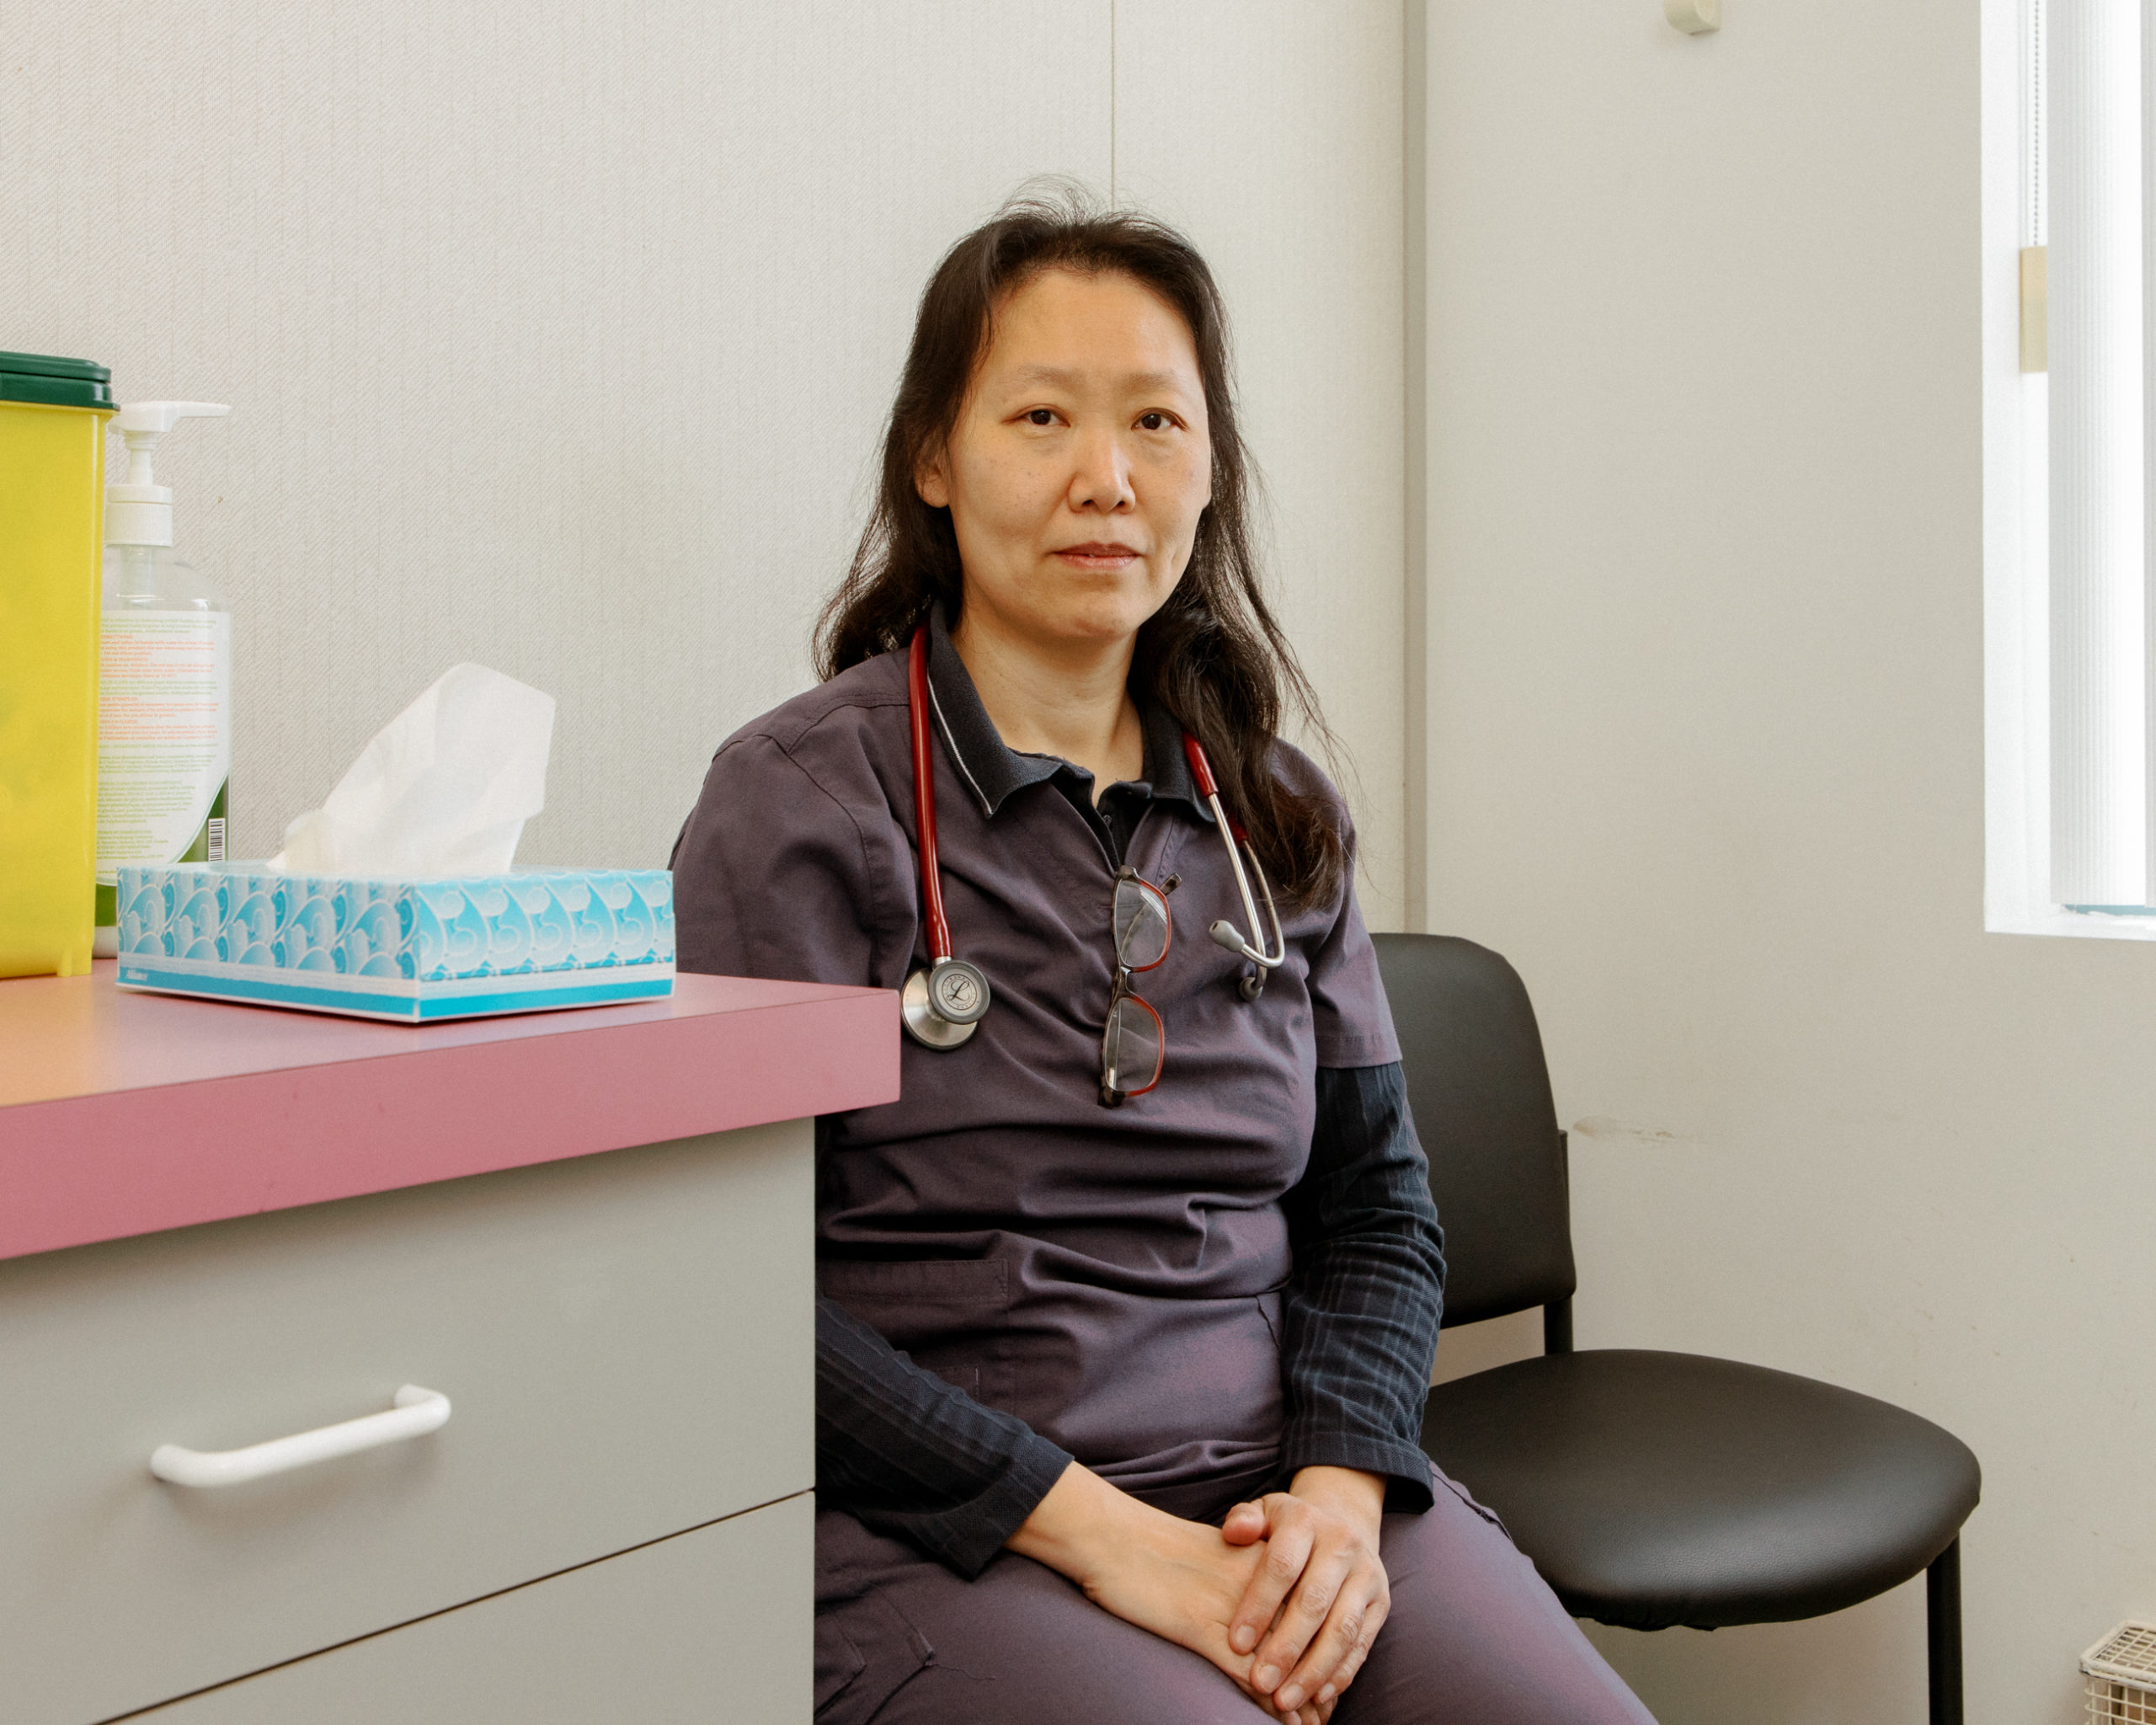 Fan.Wah Mang, a family doctor who's closing her practice, sits in her scrubs in one of her exam rooms